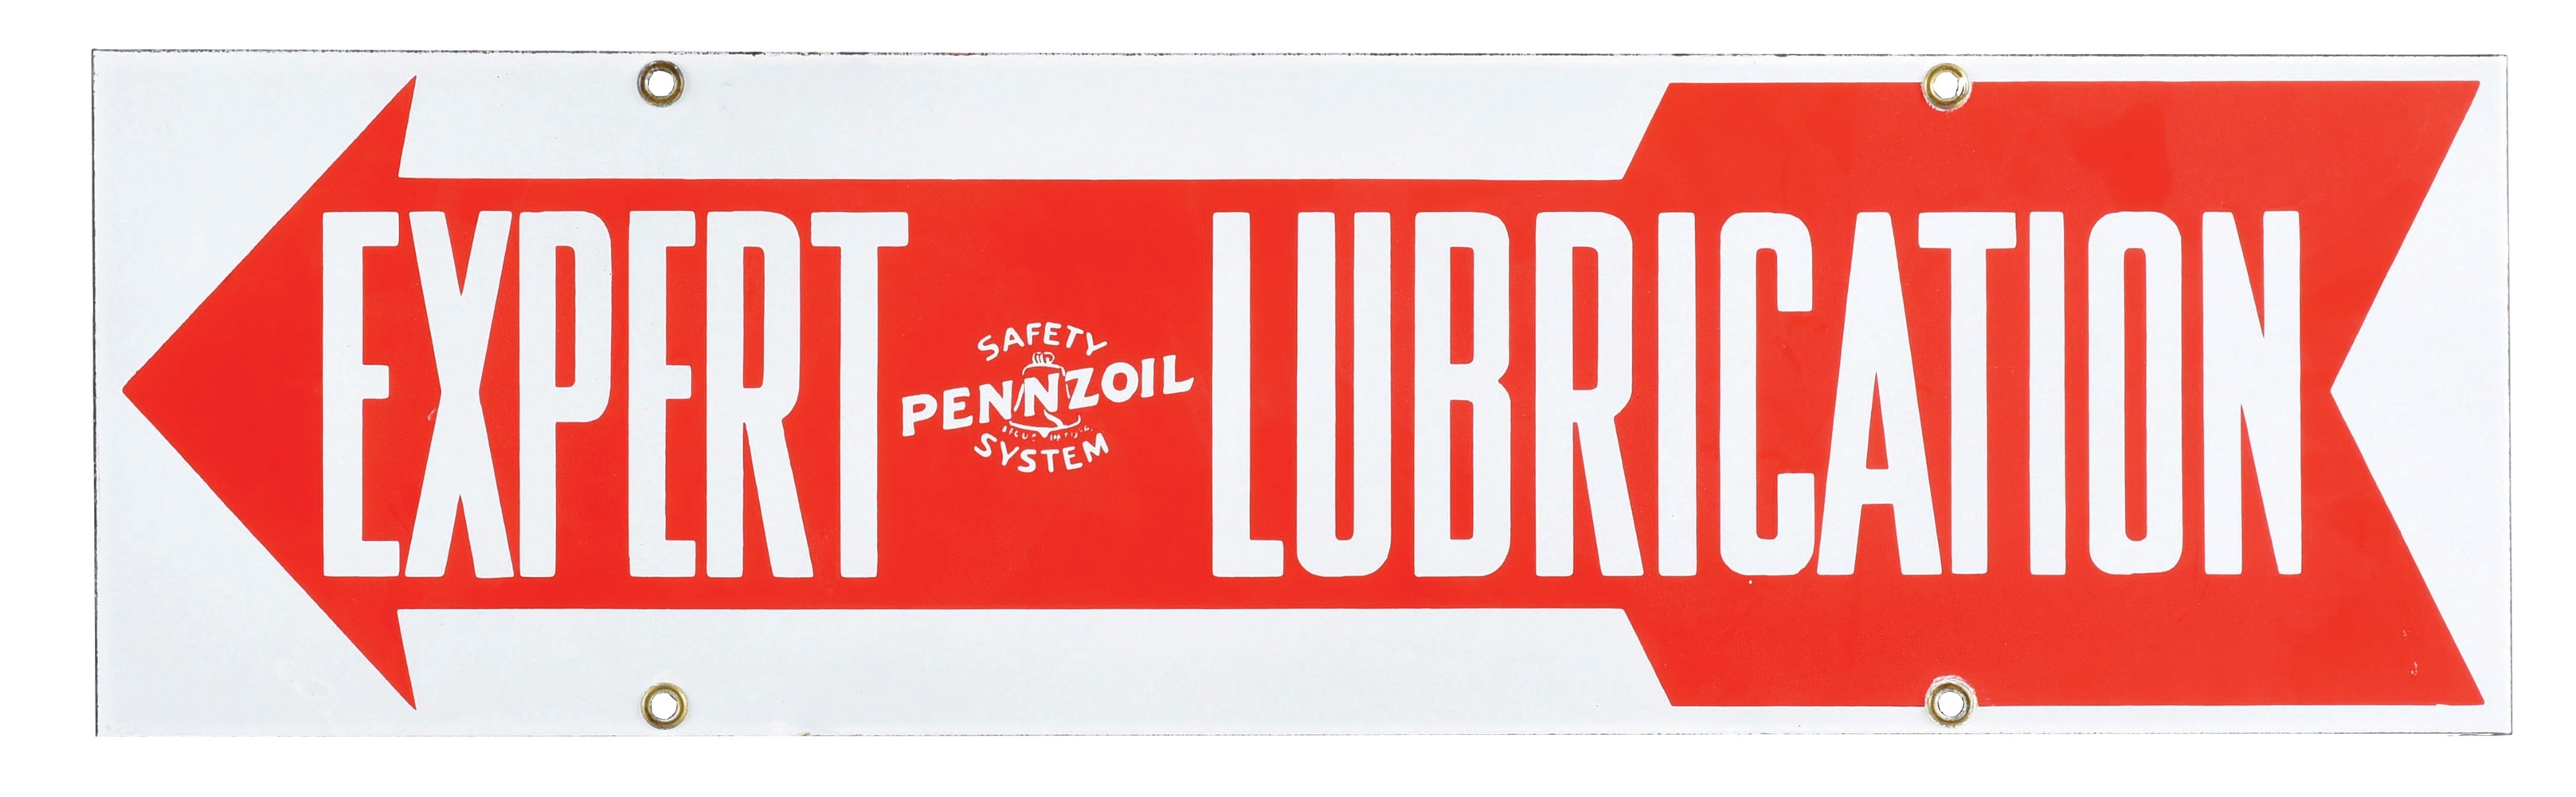 OUTSTANDING PENNZOIL EXPERT LUBRICATION PORCELAIN SIGN W/ ARROW GRAPHIC. 